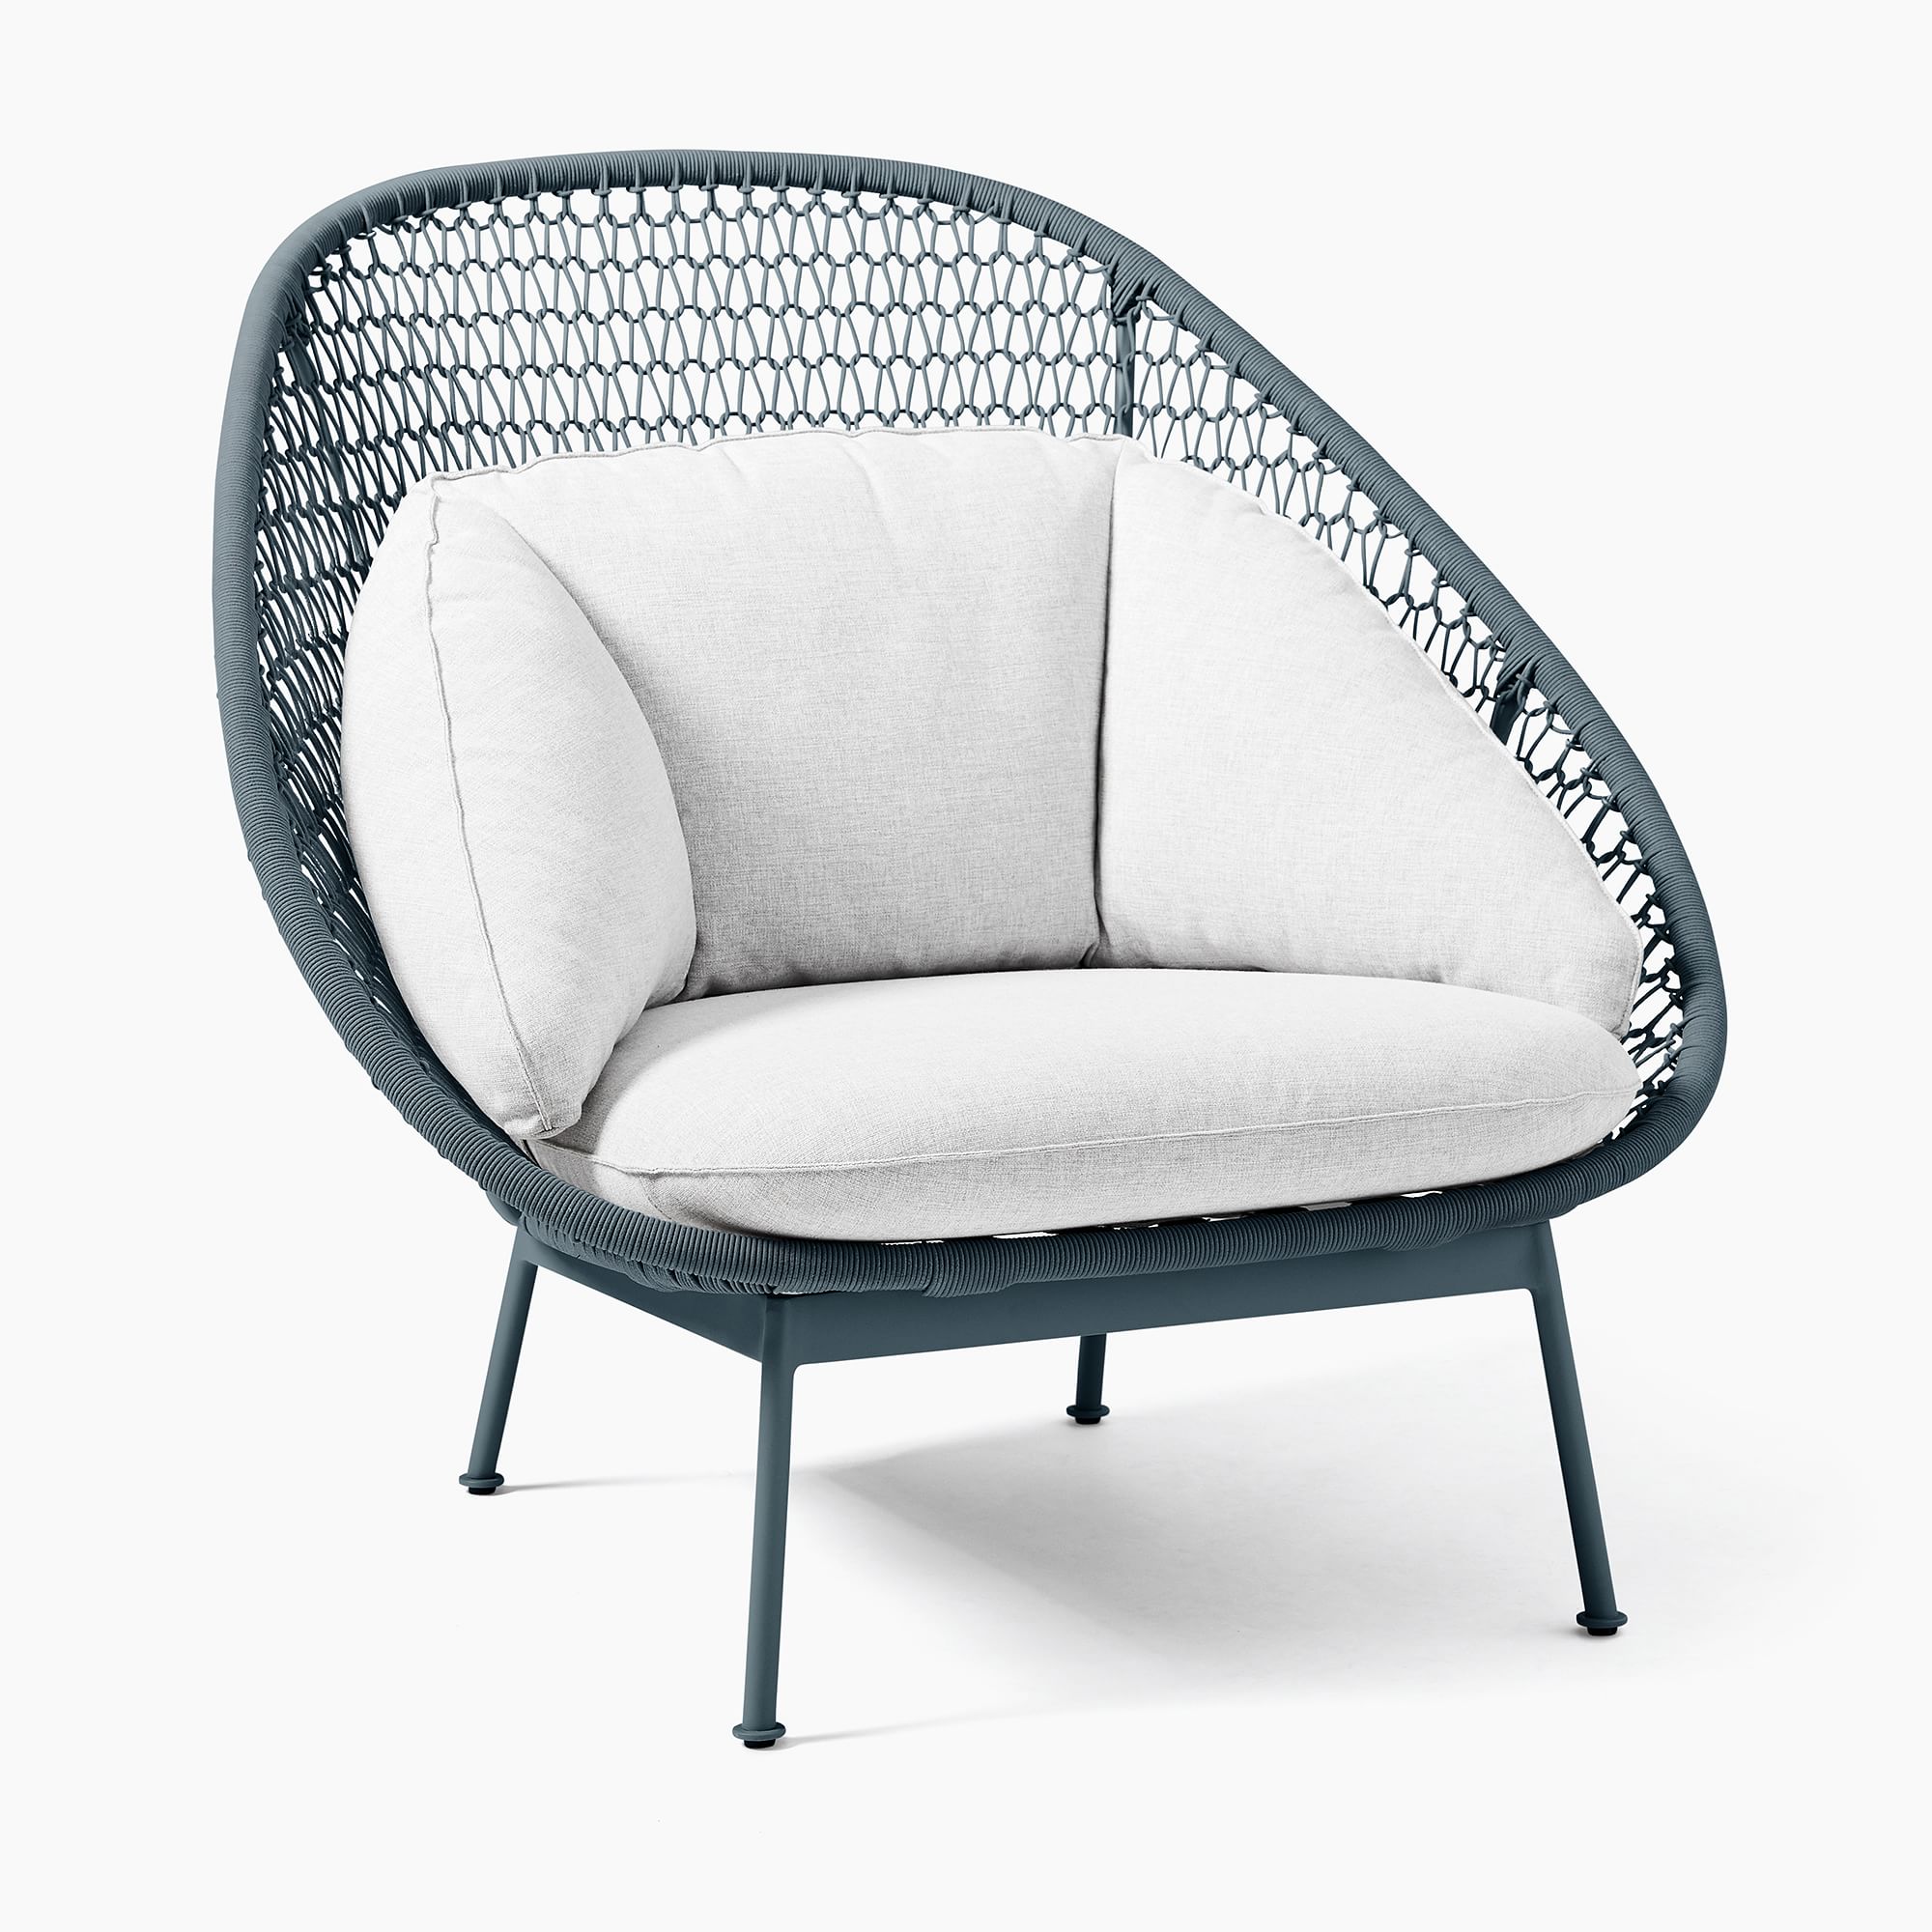 Paradise Outdoor Lounge Chair | West Elm